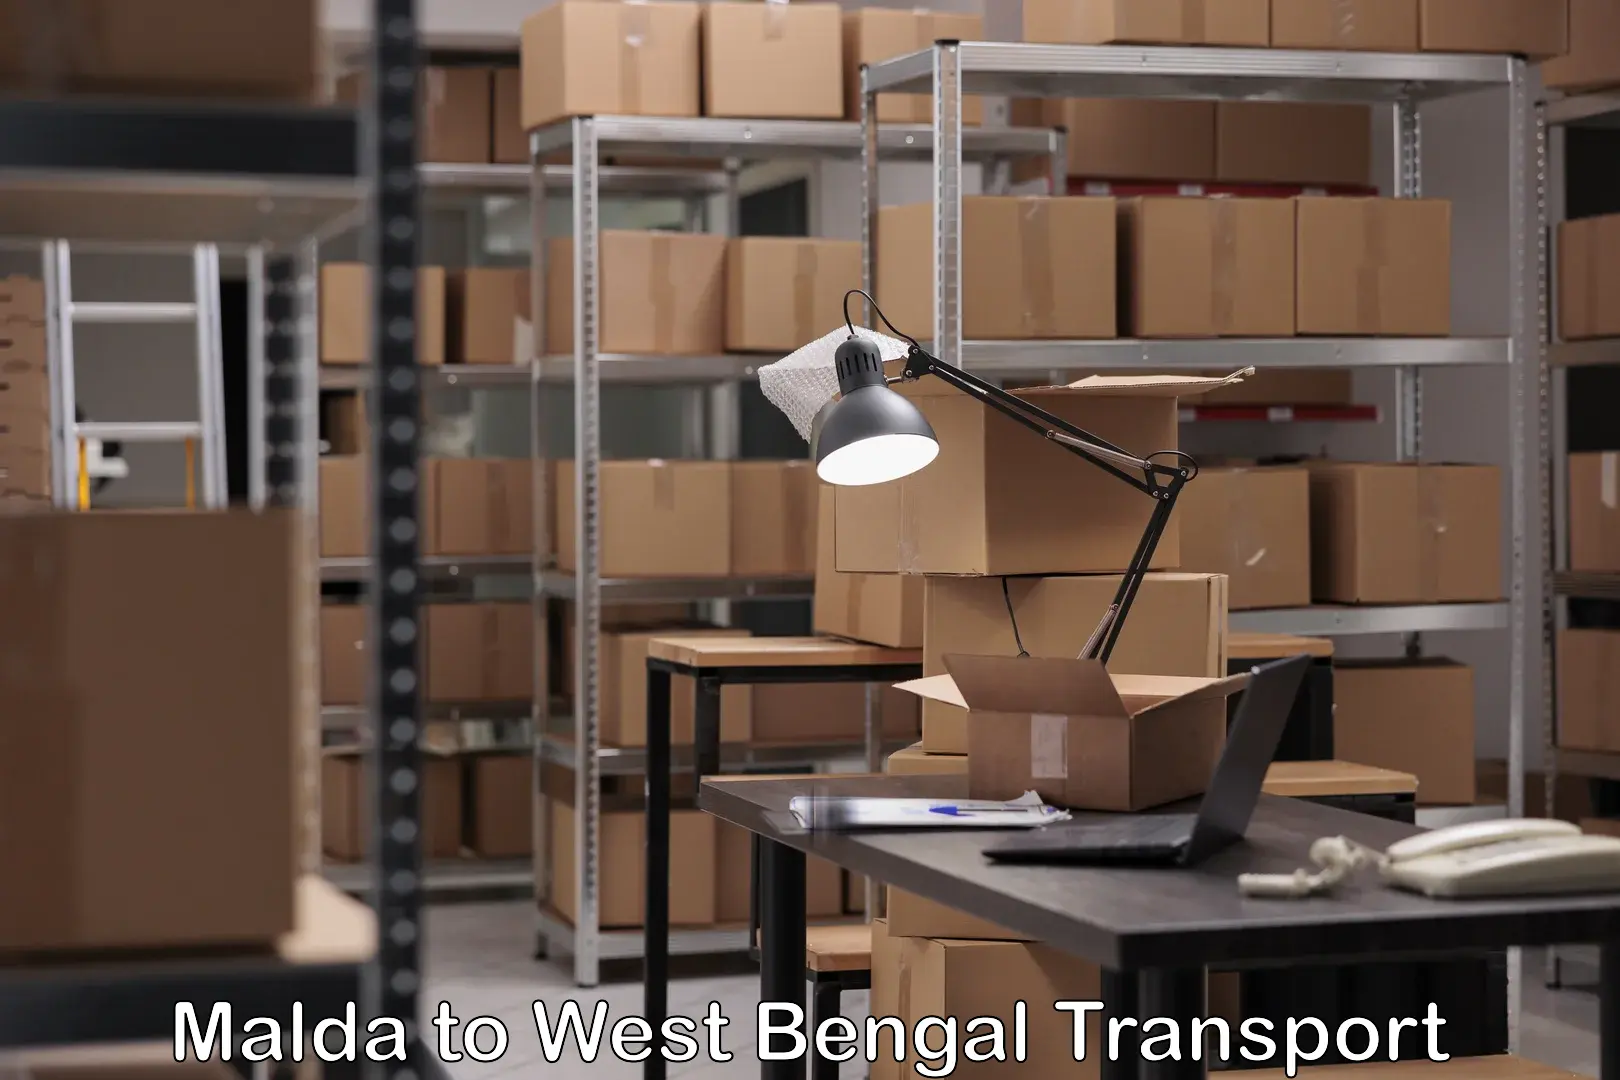 Commercial transport service Malda to West Bengal